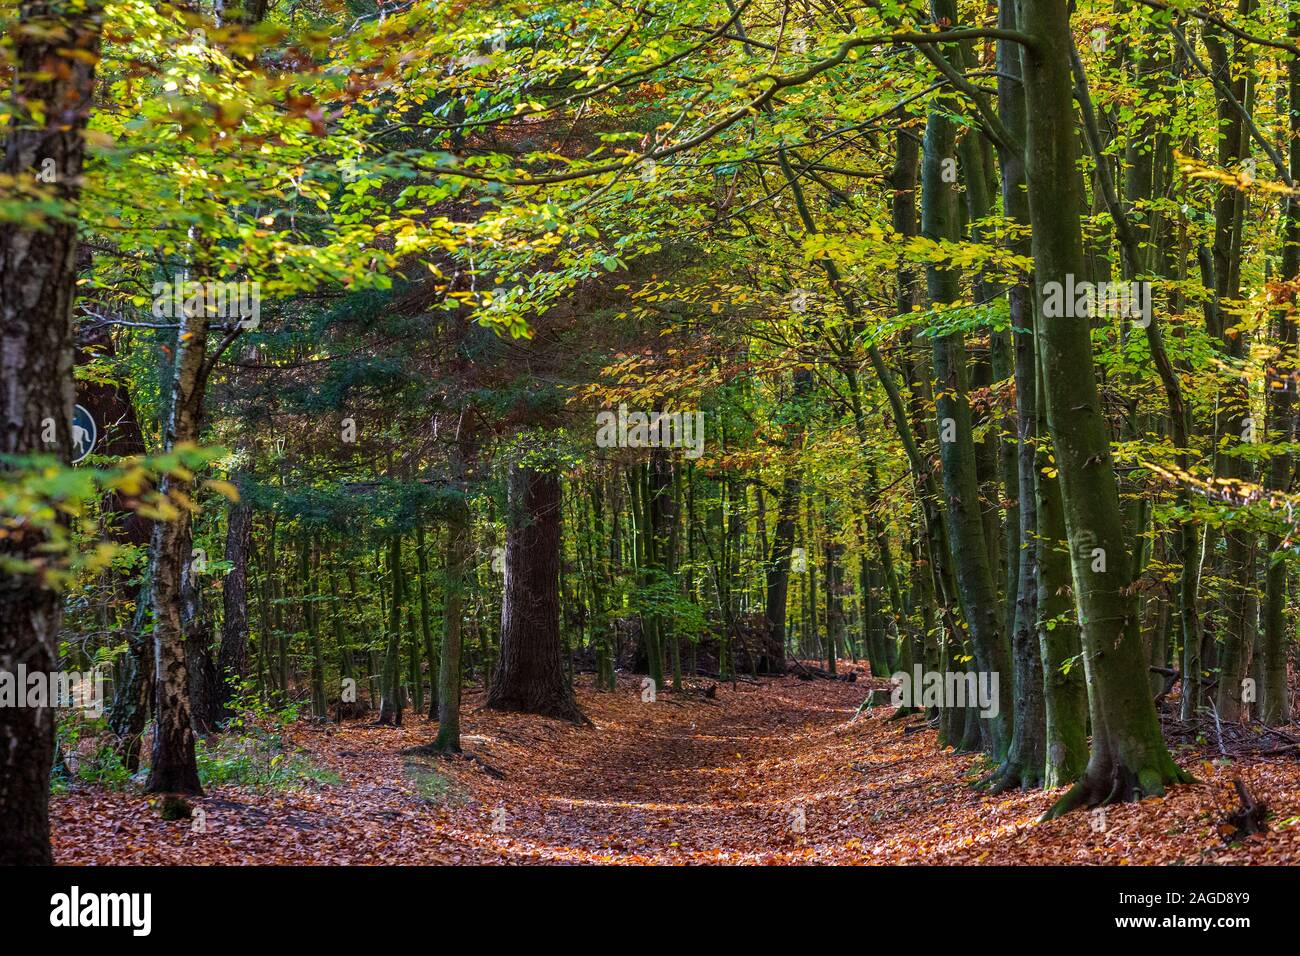 Beech trees (Fagus sylvatica). Colourful foliage in the woods, autumnal impressions. Stock Photo